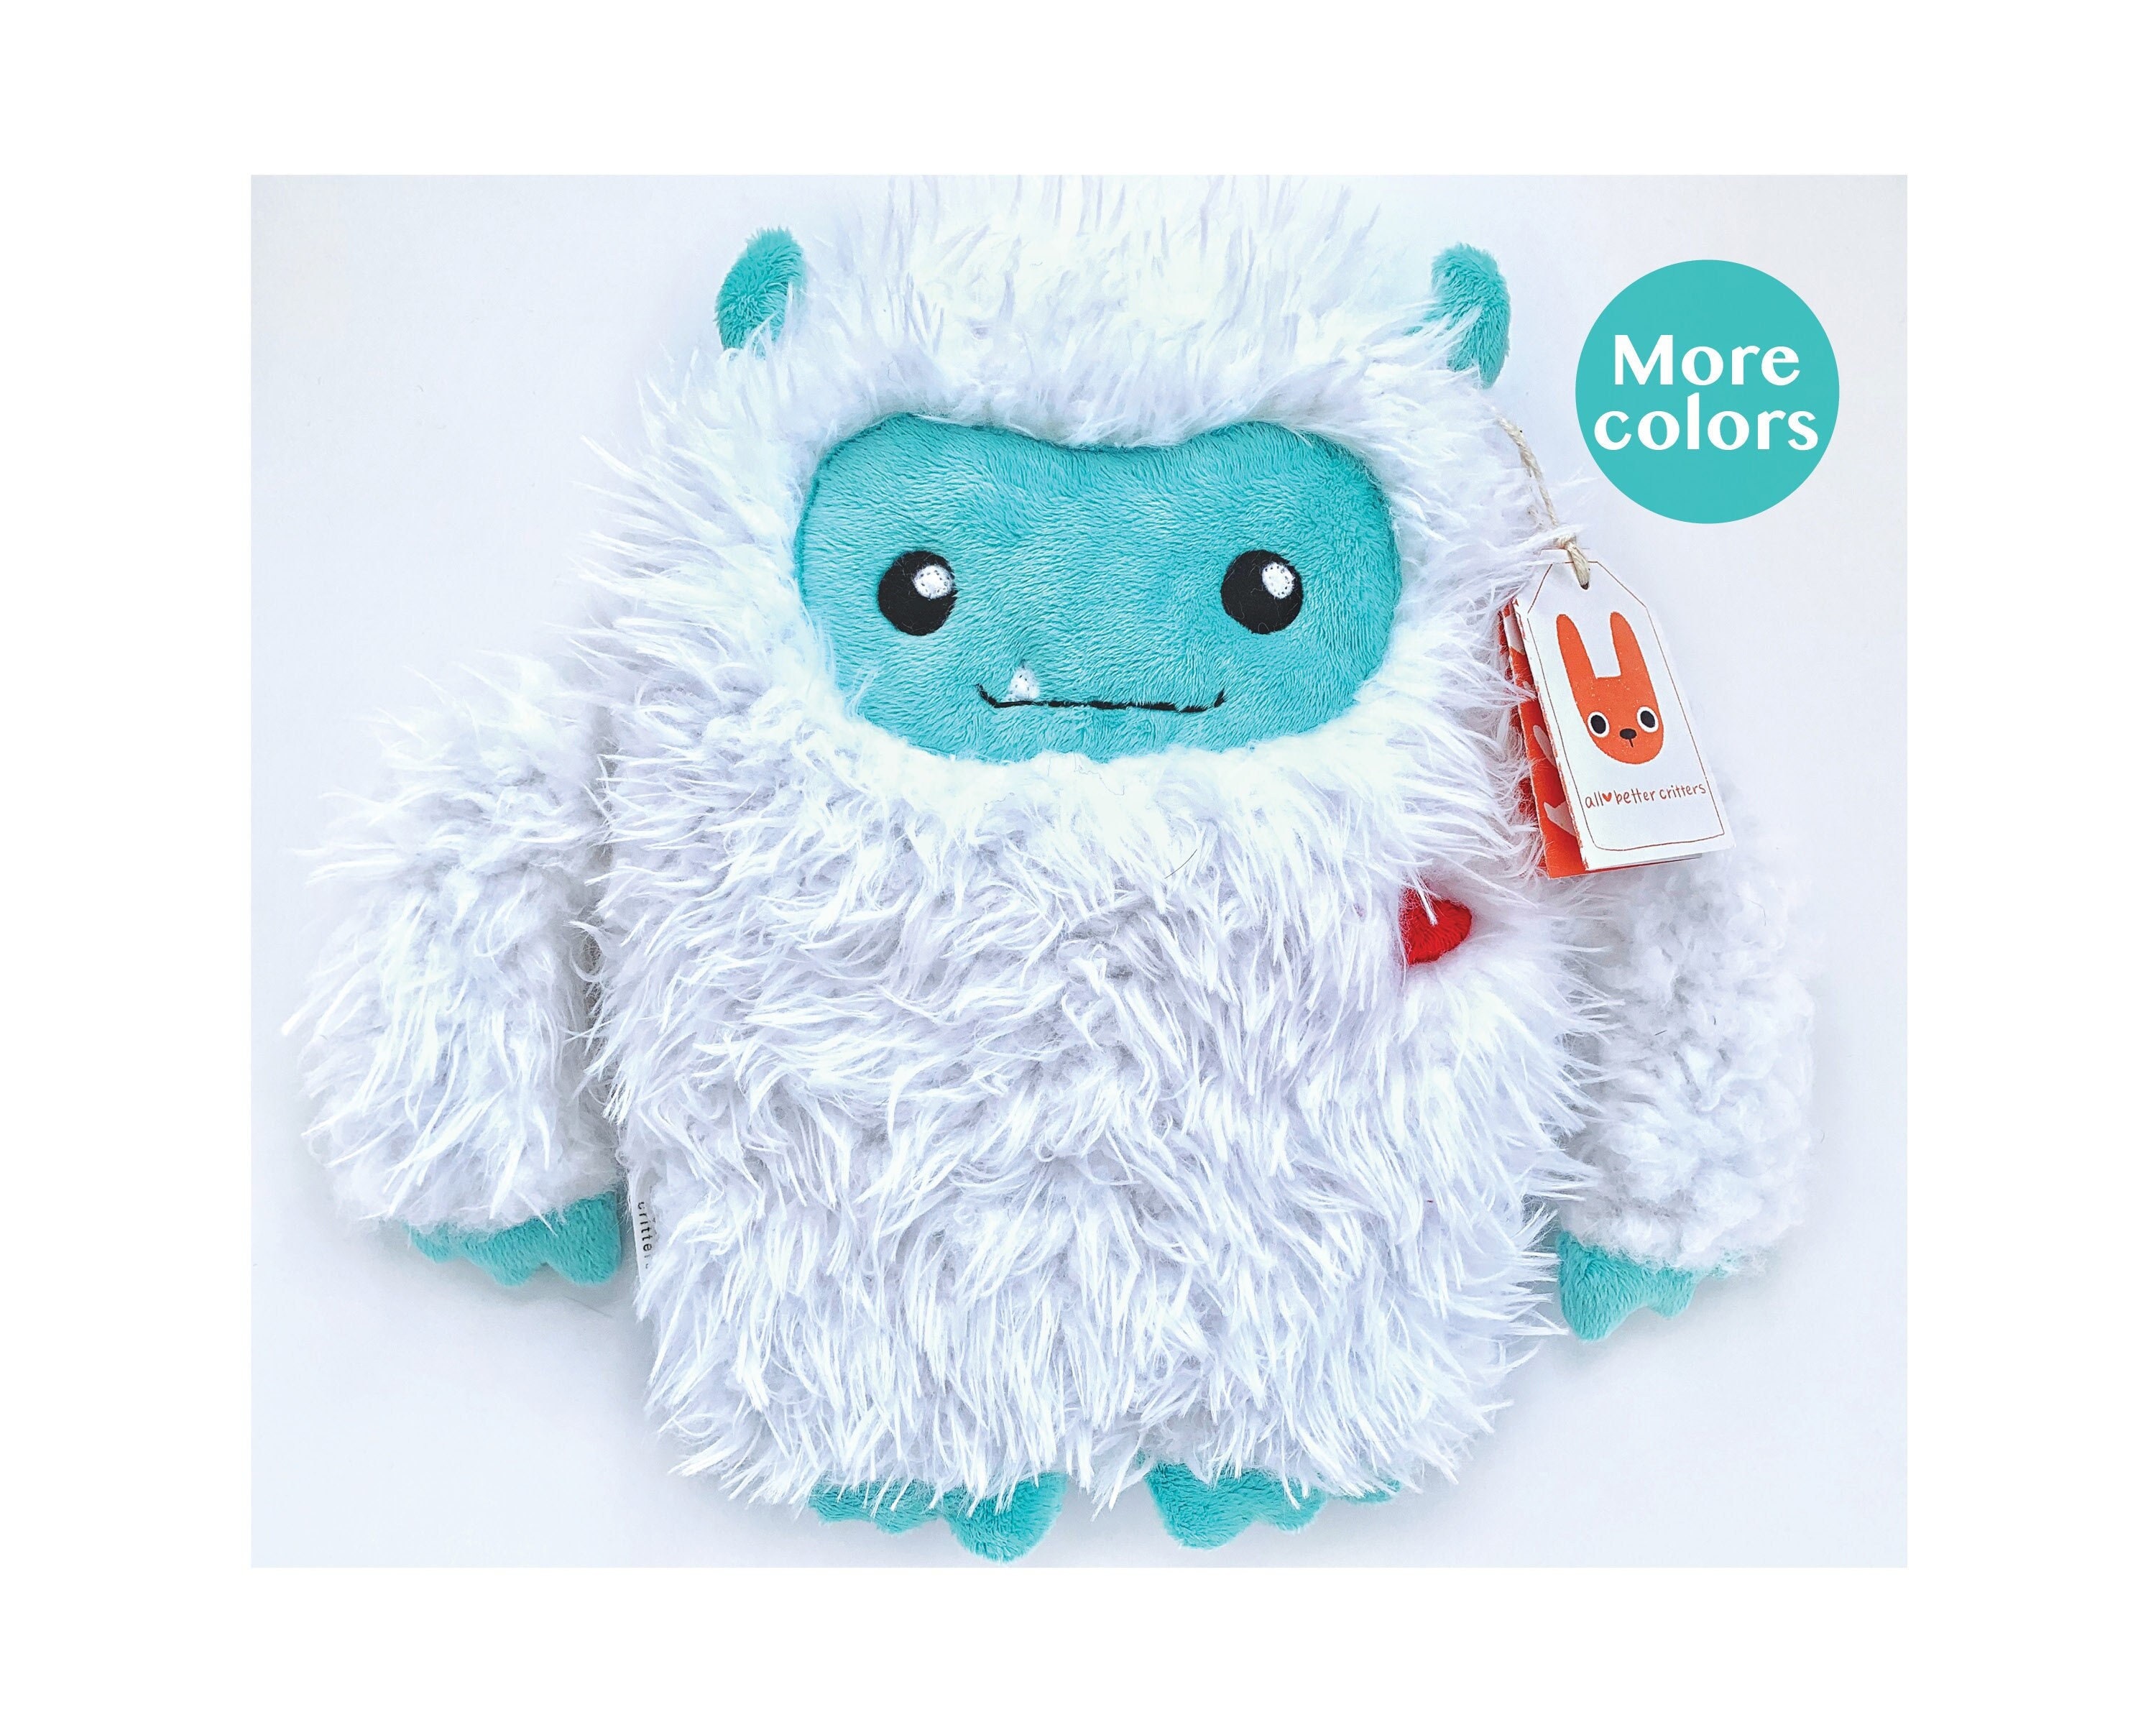 Cute Yeti Weighted Plush Cryptid | Handmade | Abominable Snowman | Washable | Heatable | Hug Pillow | MADE-TO-ORDER | Best Friend Gift